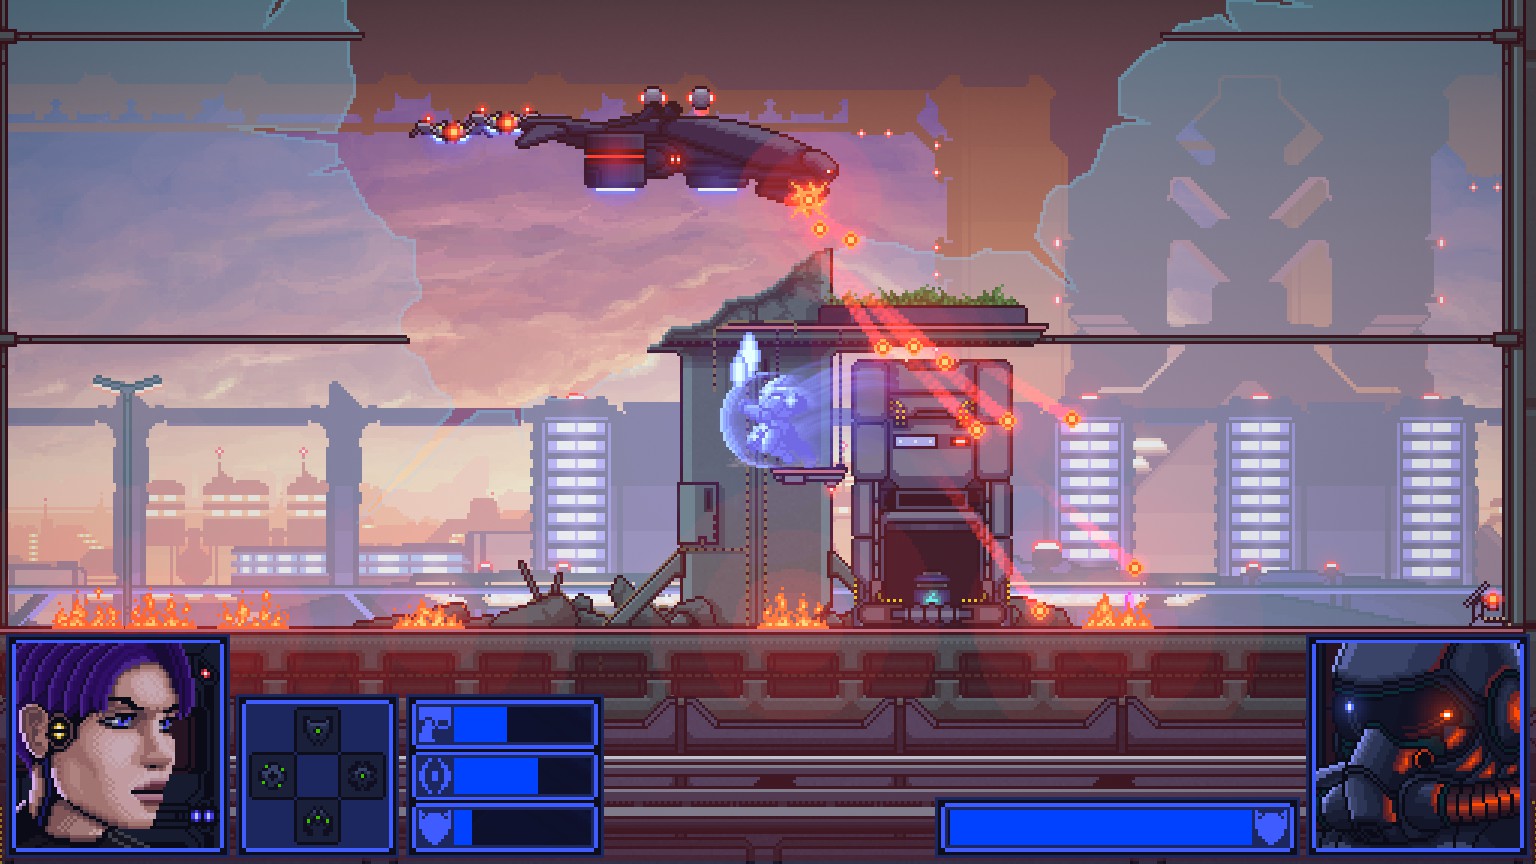 a fight between a airship and the Titanium hound, a blue aura can be seen around the suit. below is a two portraits, left a woman with purple hair and a transponder in her ear, right a pilot with a orange tint showing the sunset reflecting off the helmet.